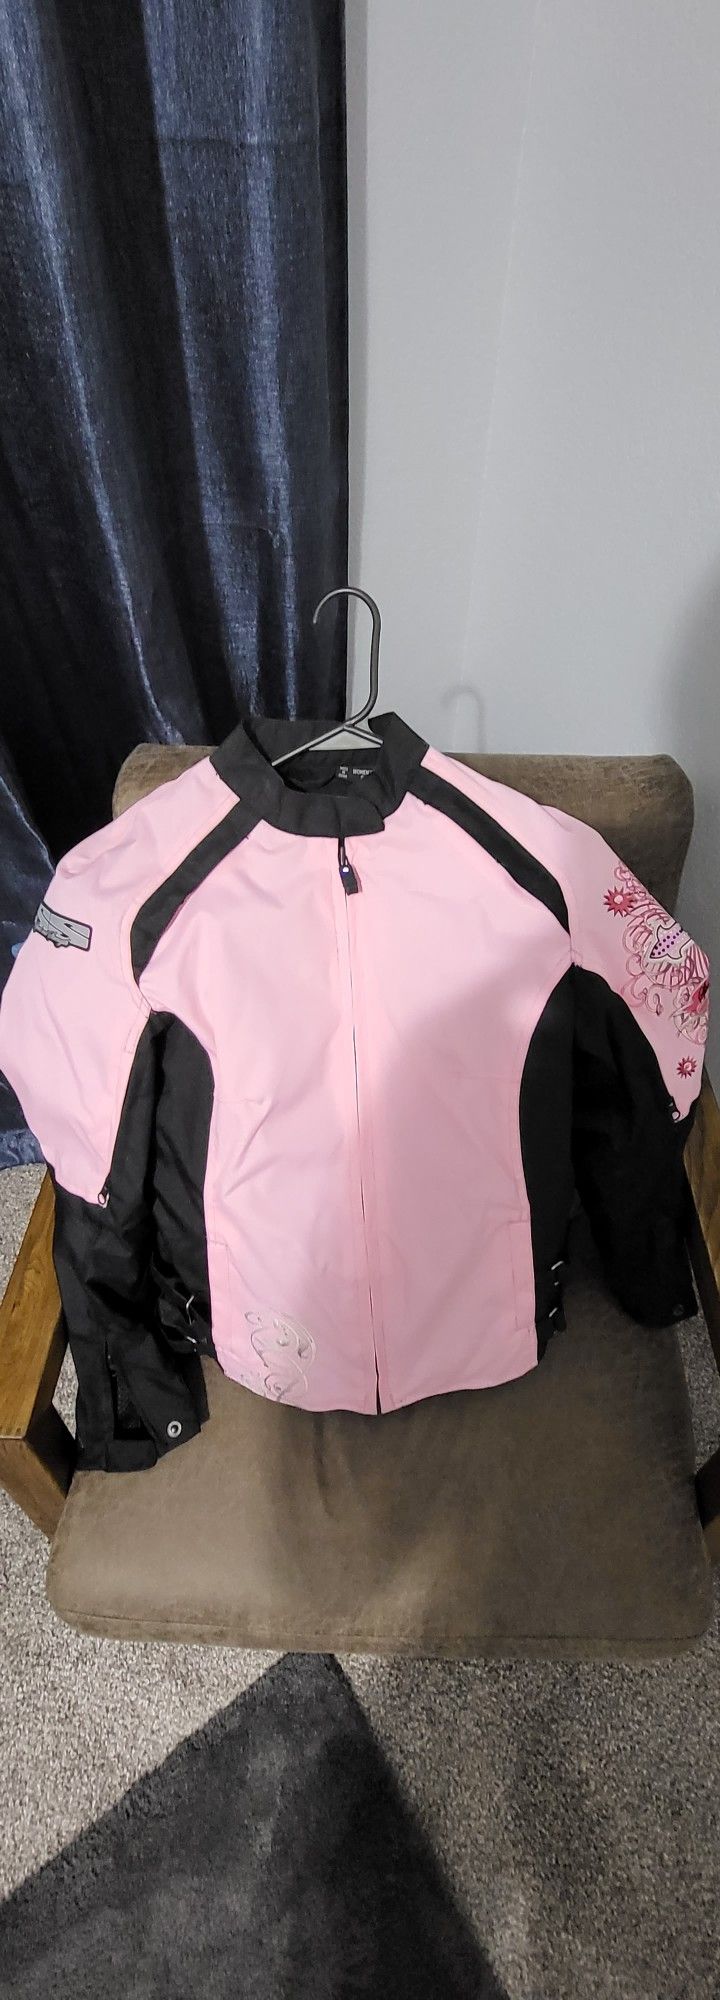 Women's Speed And Strength Motorcycle Jacket